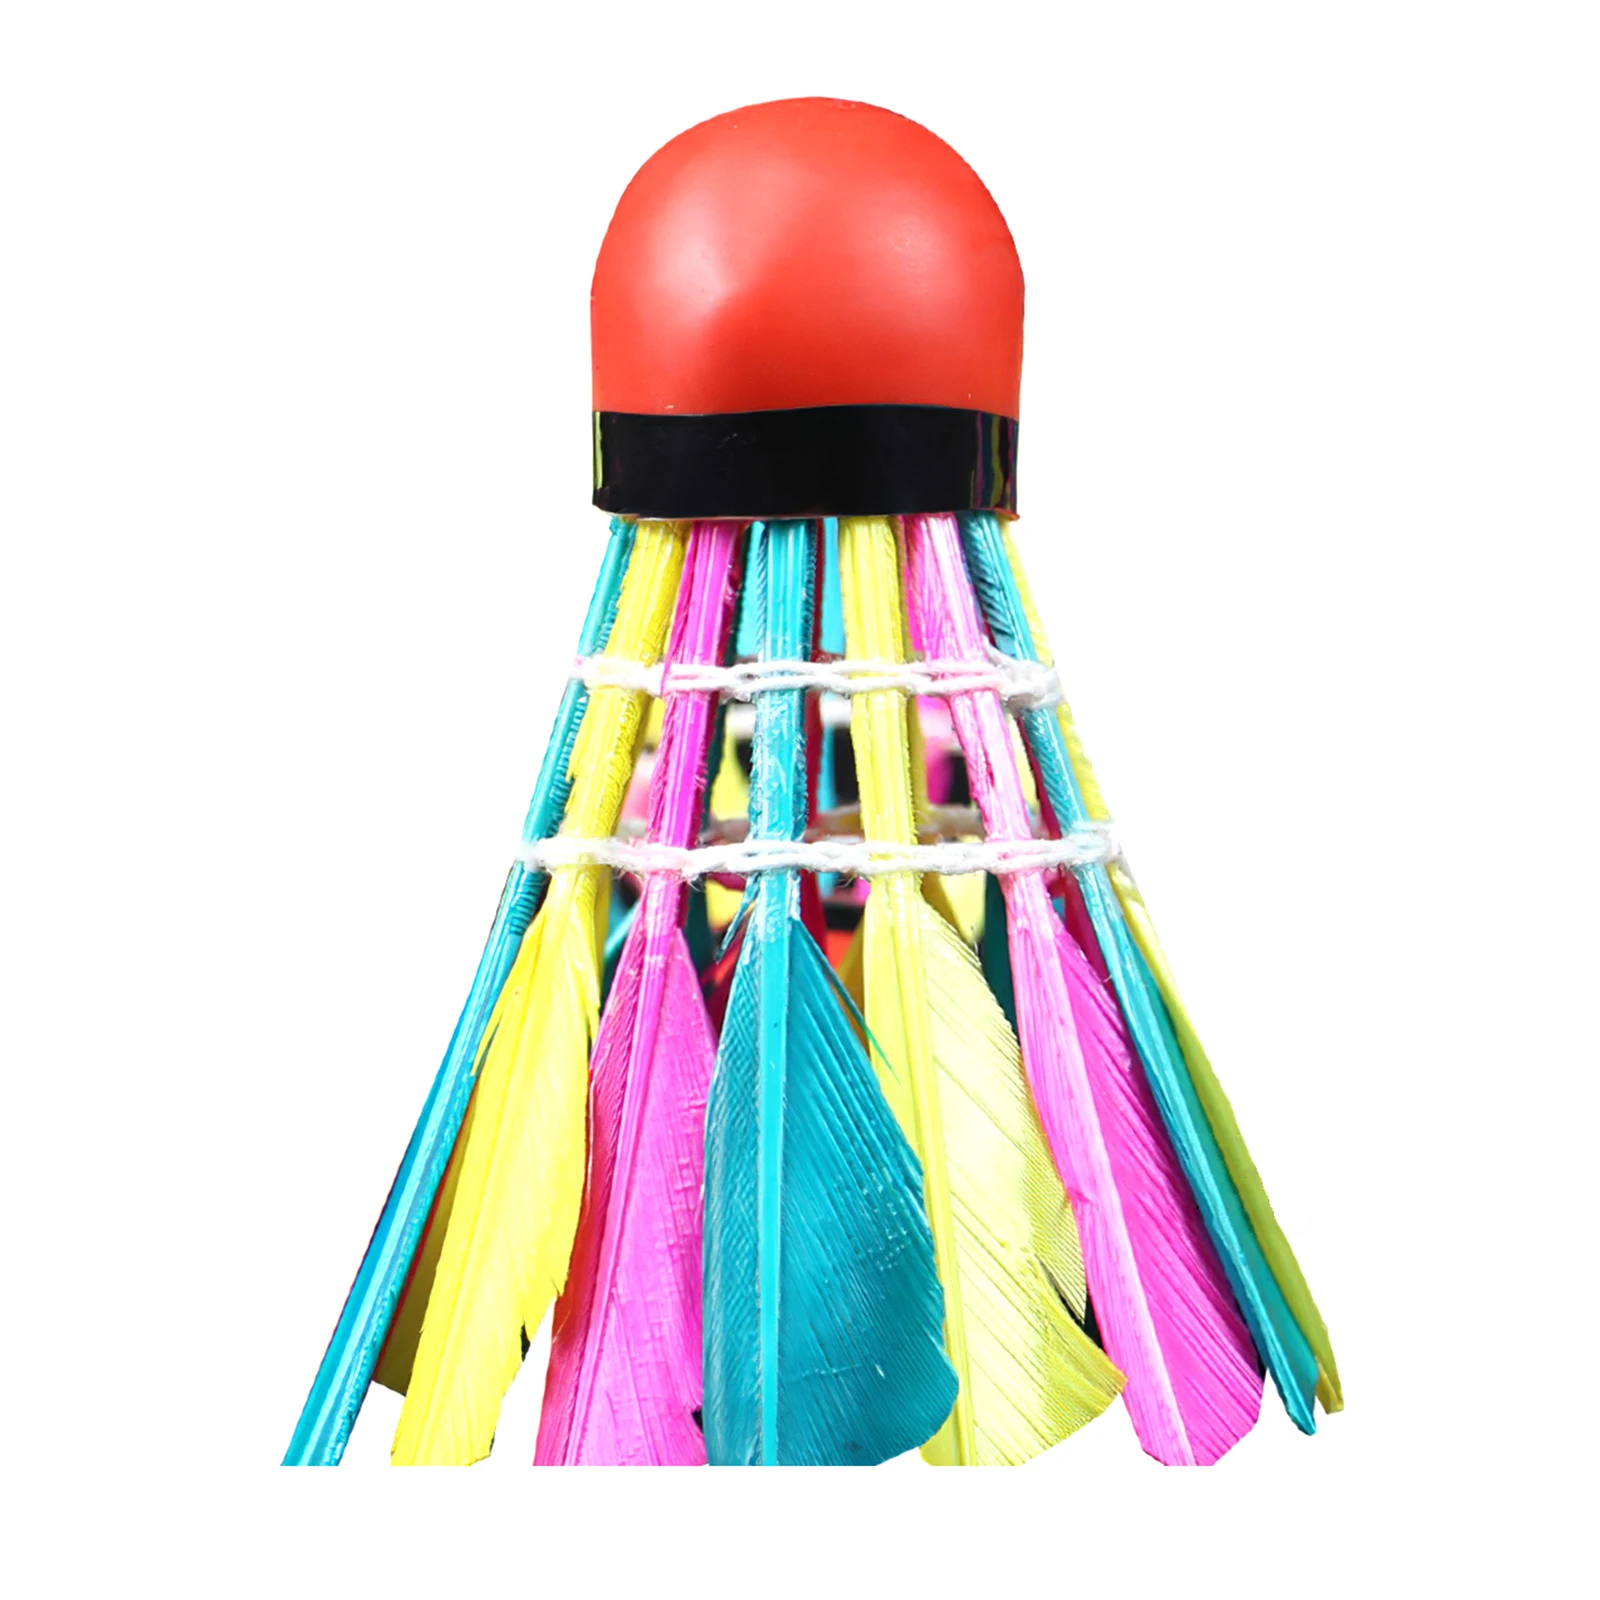 Haofy 11Pcs/Lot Durable Colorful Badminton Balls Shuttlecocks Sports Training Accessory Badminton Shuttlecocks Birdies Feathers Birdies Shuttlecock Indoor Outdoor Training 